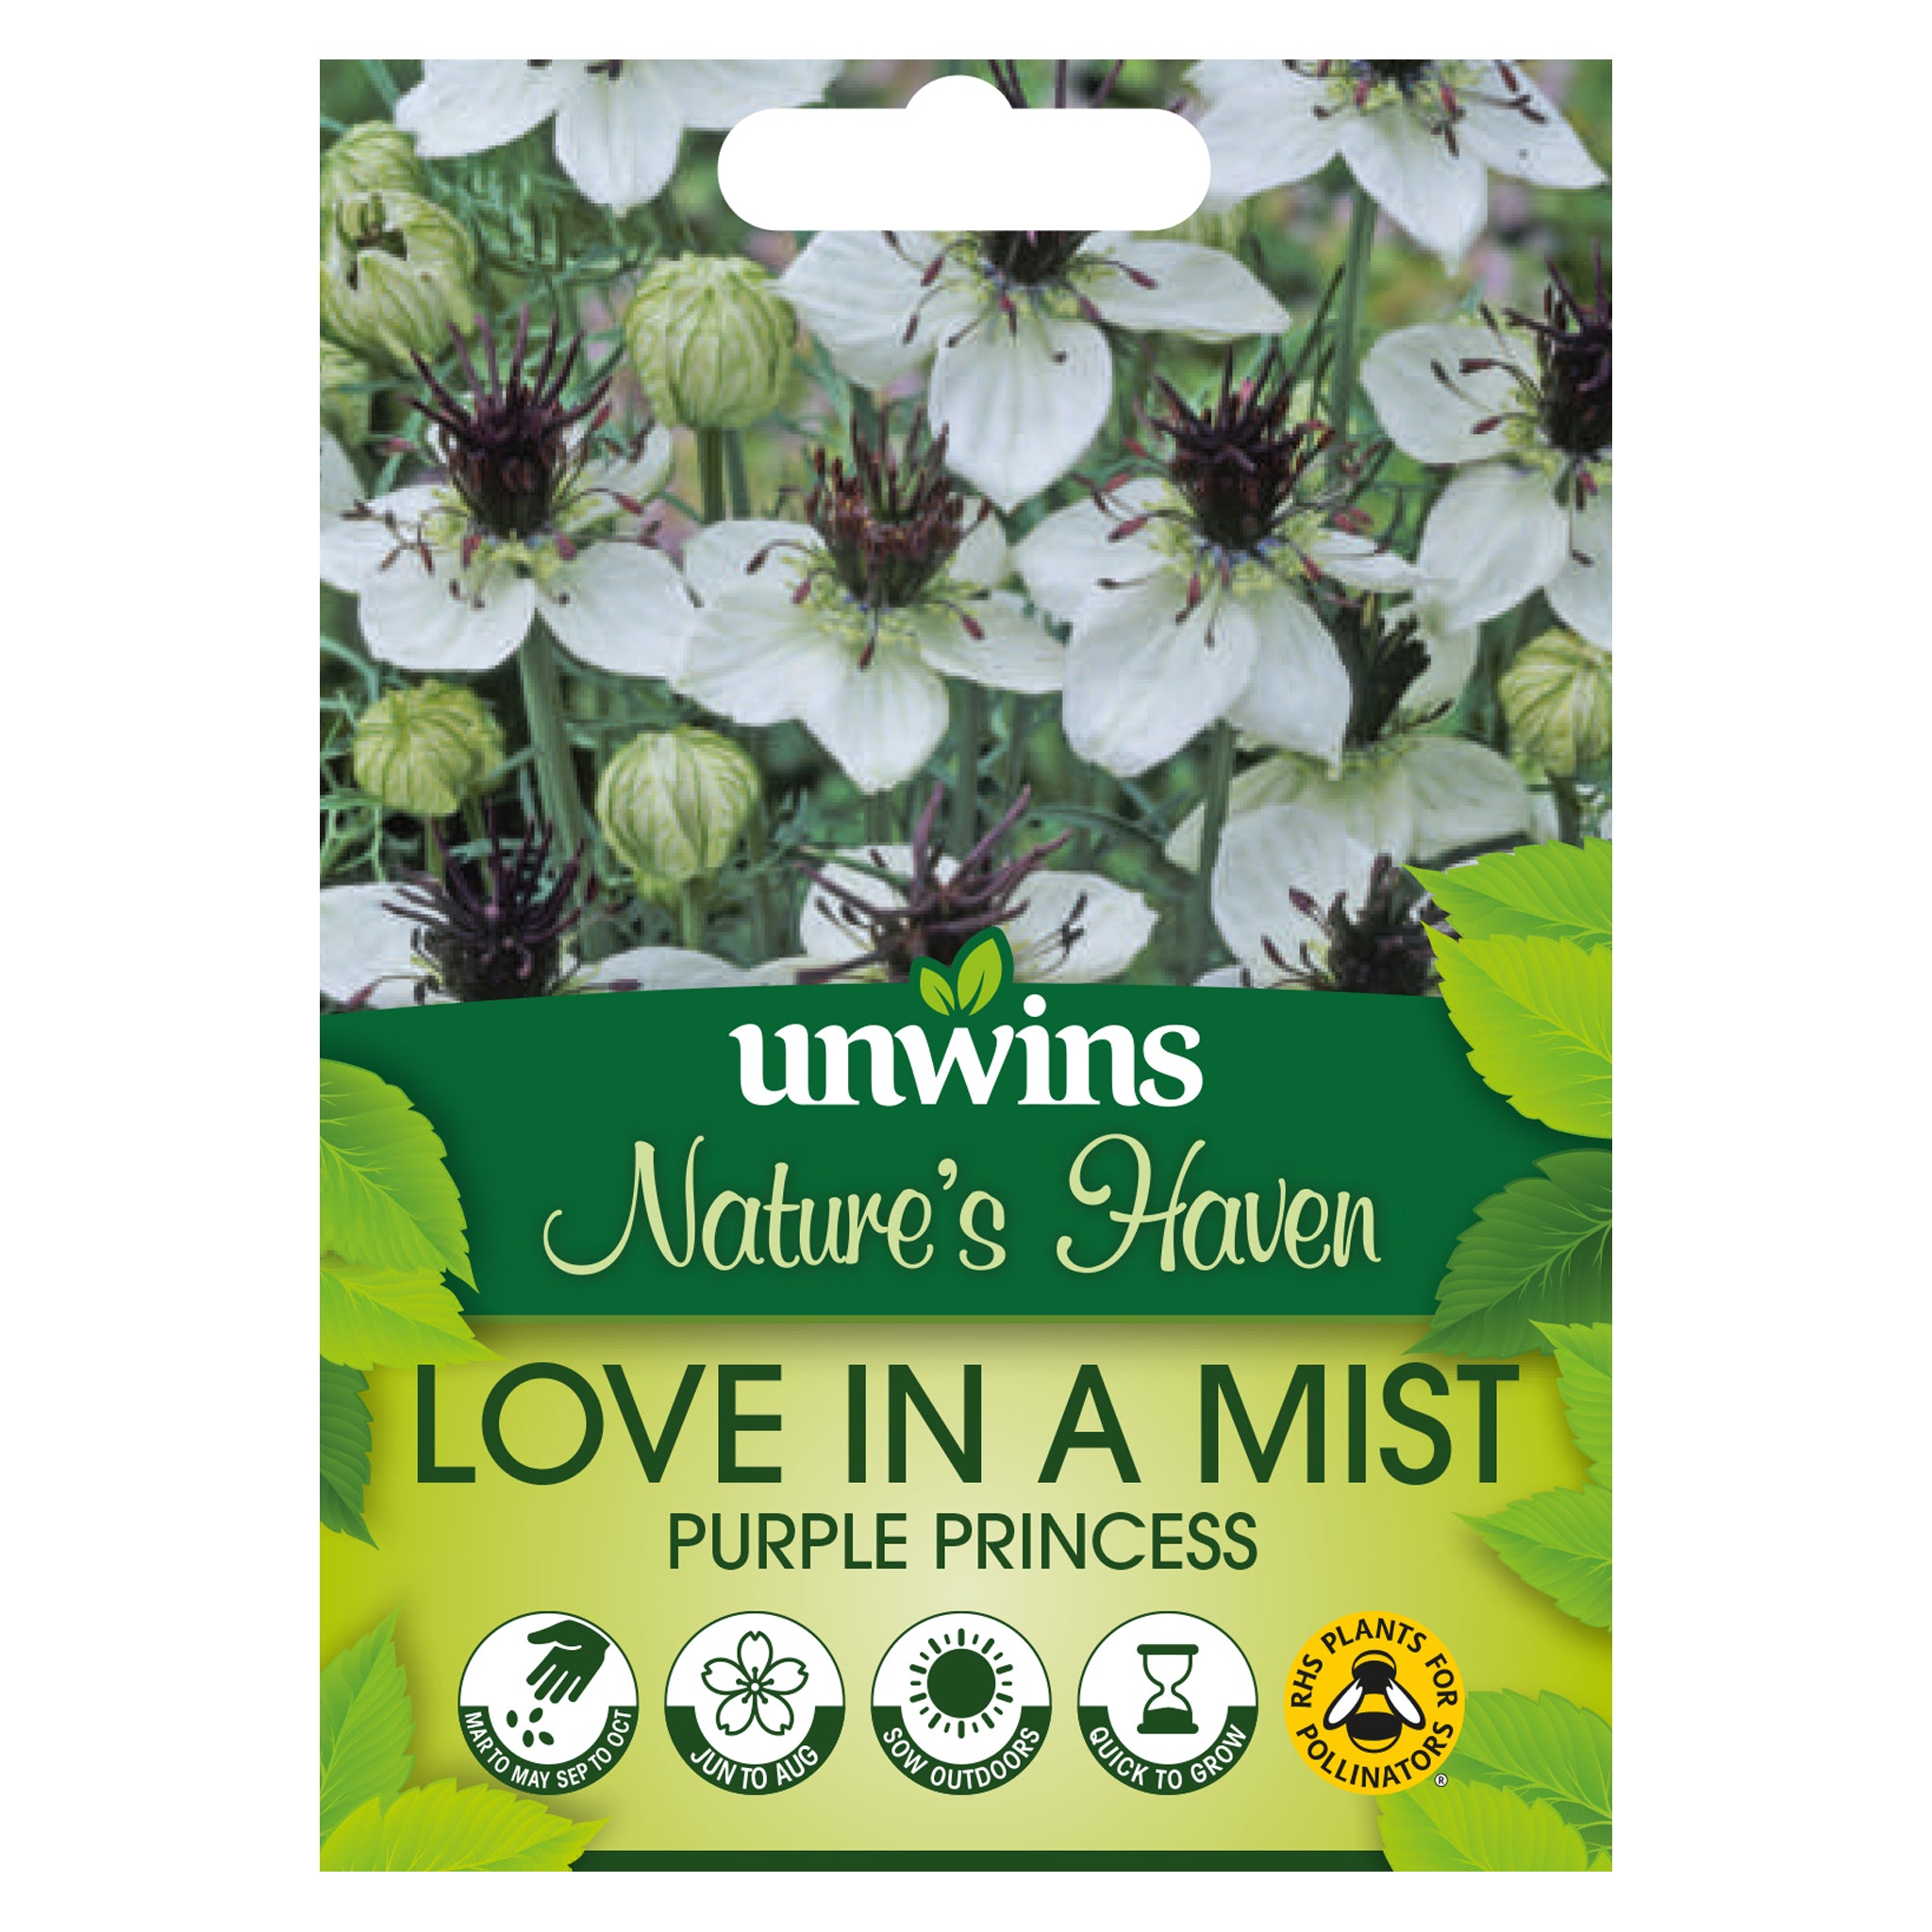 Nature's Haven Love in a Mist Purple Princess Seeds